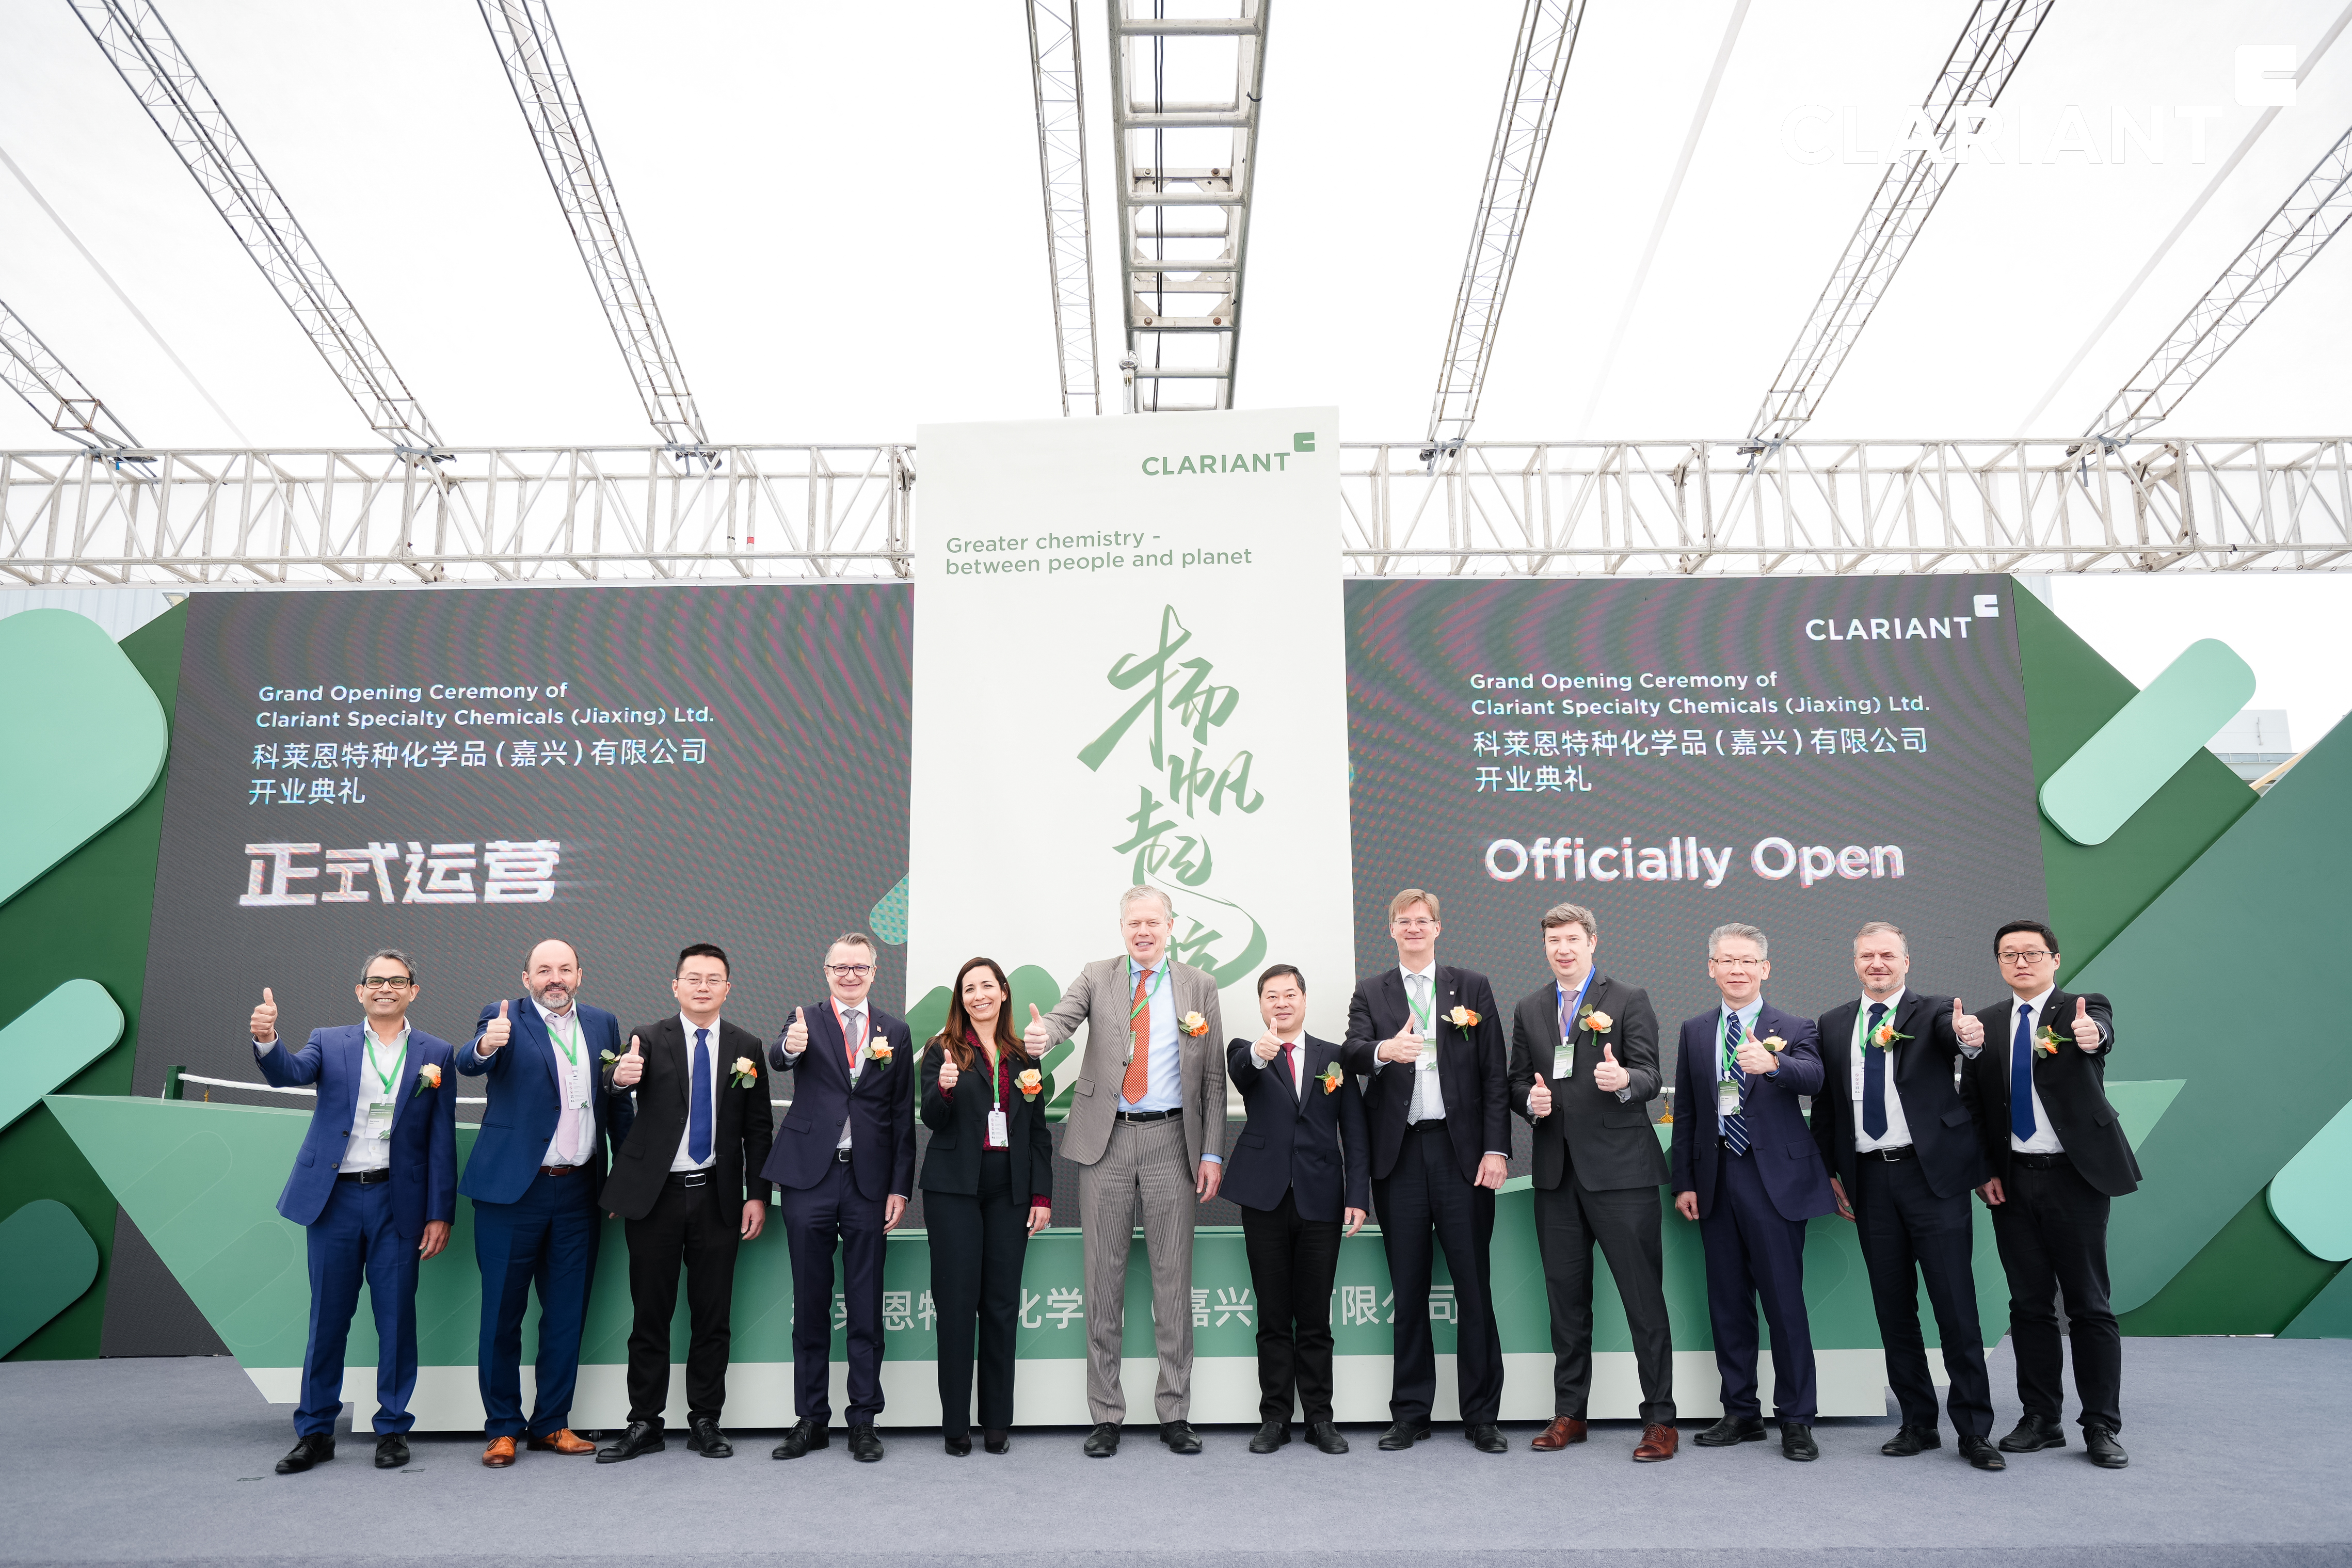 Clariant announces grand opening of its new CATOFIN catalyst plant in China.